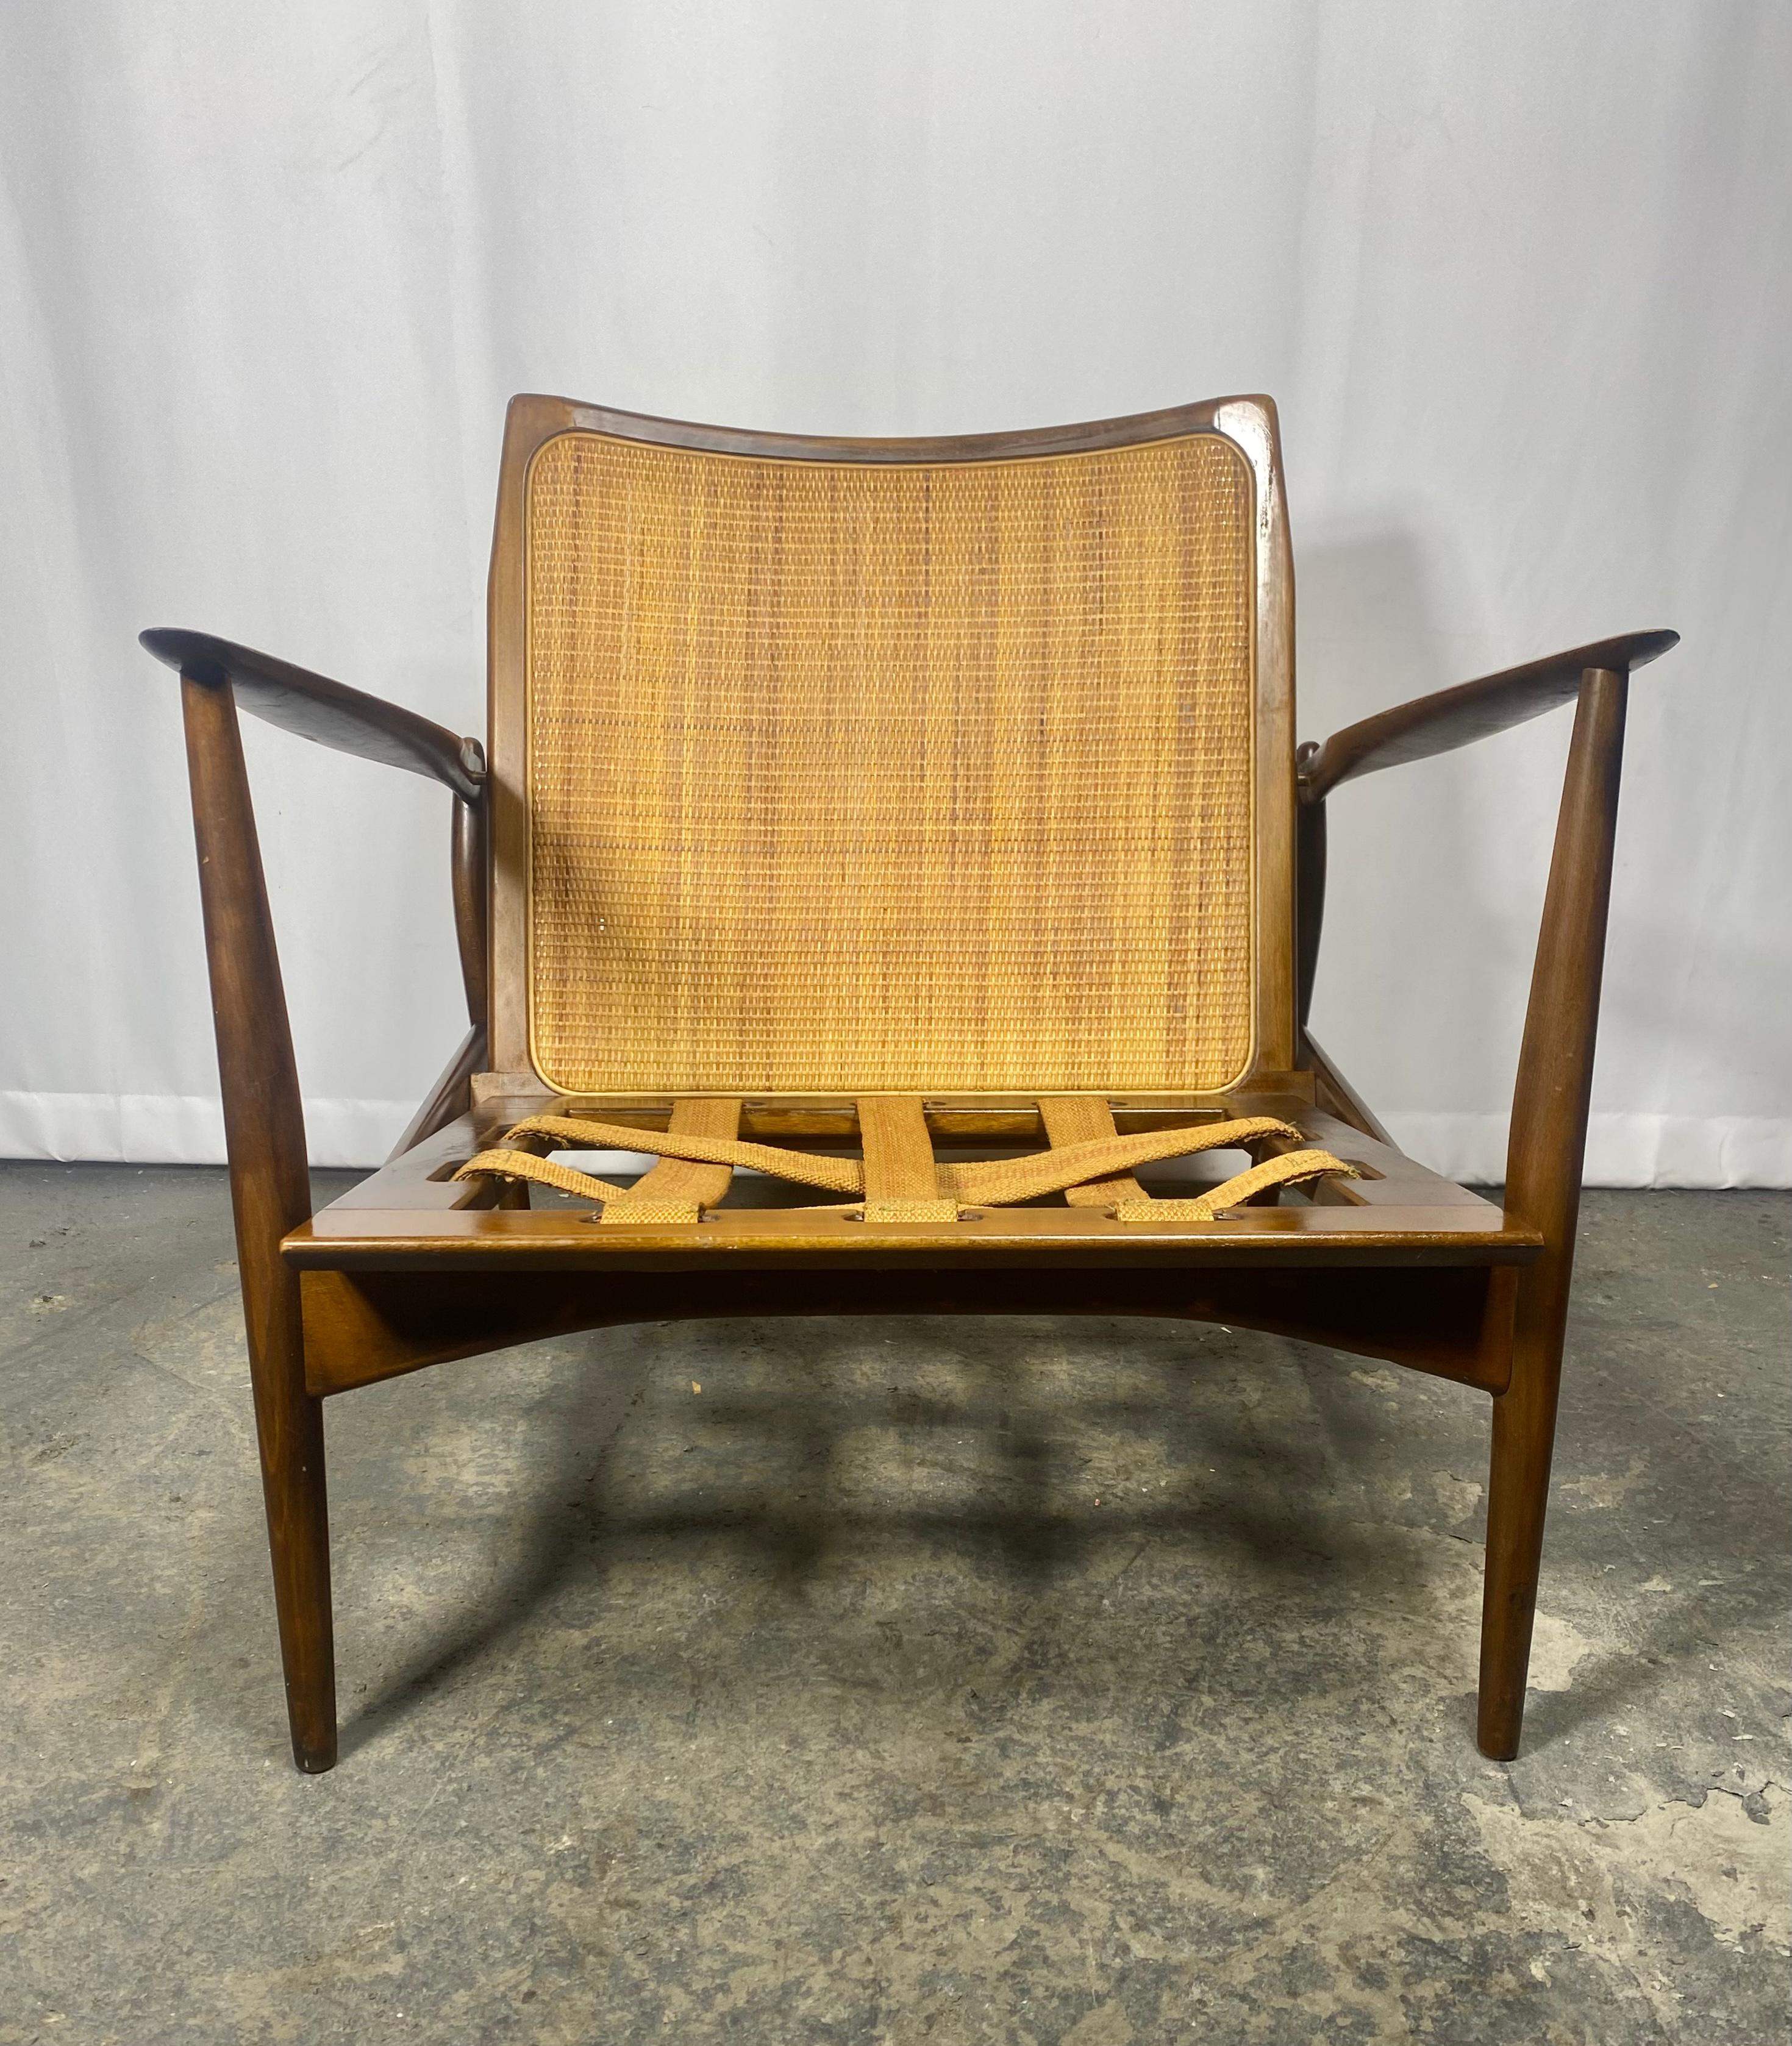 Ib Kofod-Larsen Easy Chair Produced by Selig... Classic Danish Modern,  Stamped MADE IN DENMARK.,, Nice original condition, very minor splits to caning (see photo), also absent of original seat cushion. Amazing design, Perfect addition to your